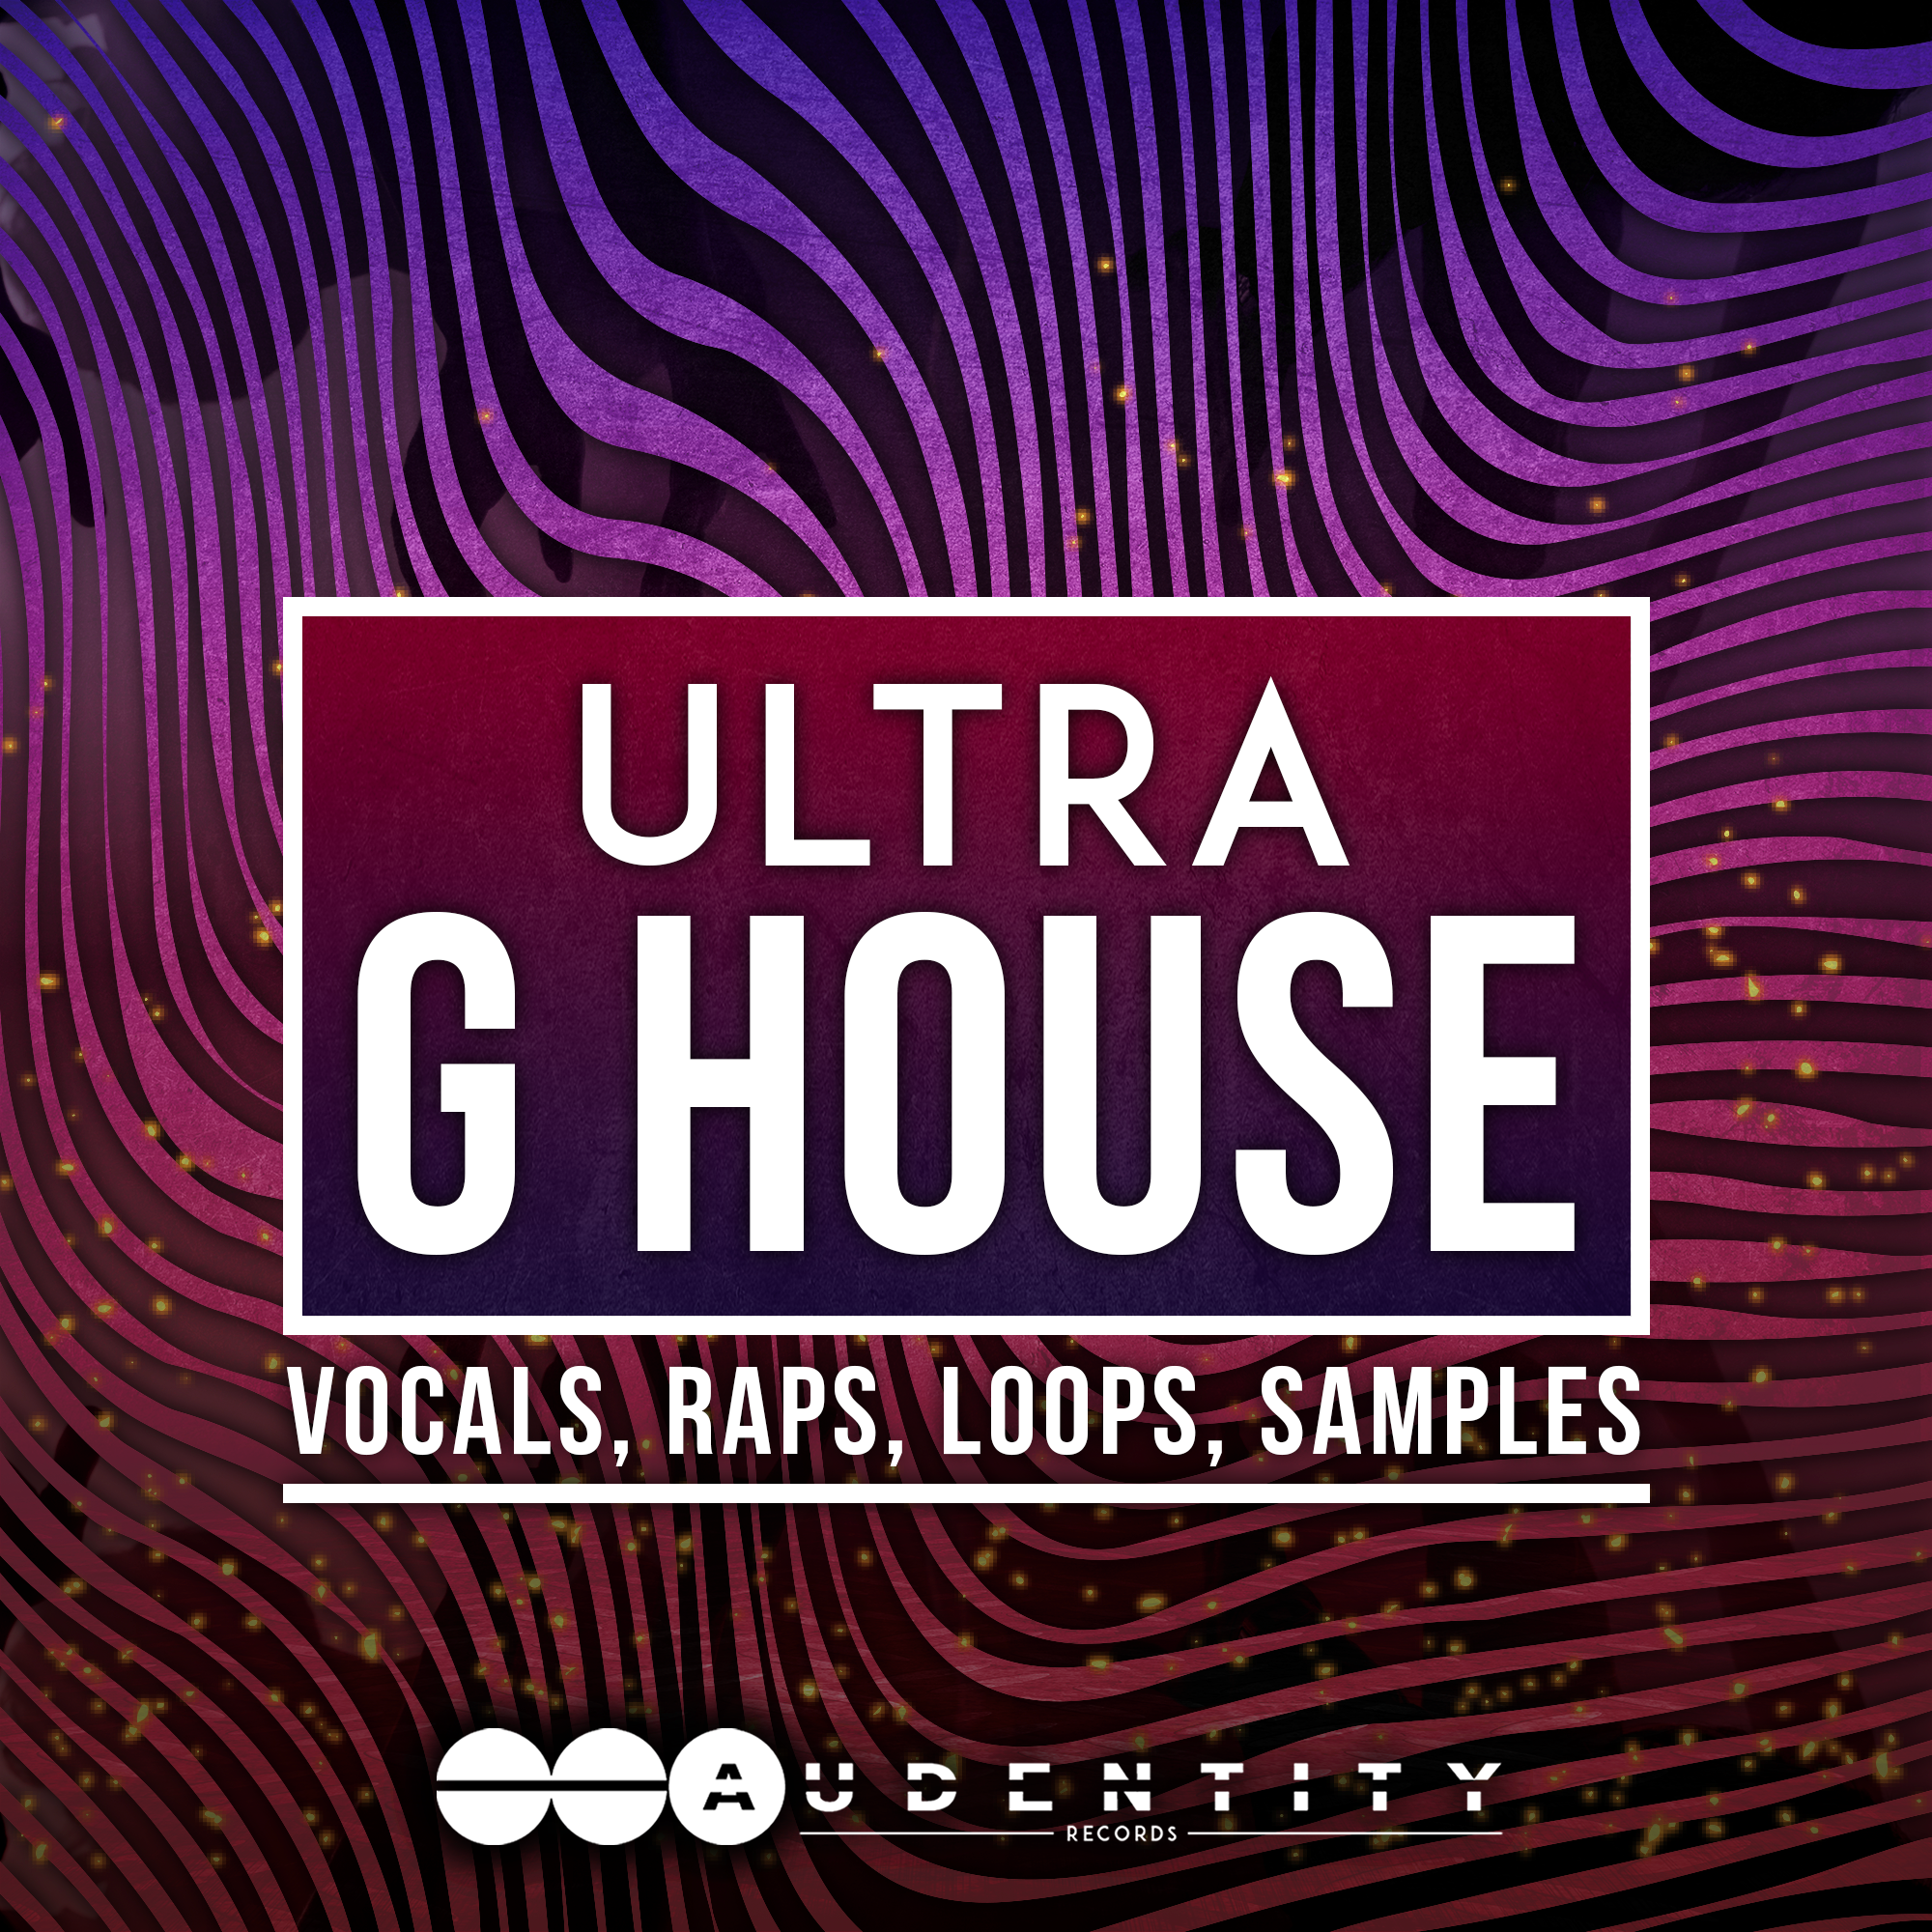 Bass сэмплы. G House треки. Ultra records. Audentity records - Vocal House. Audentity.records.Bass.House.